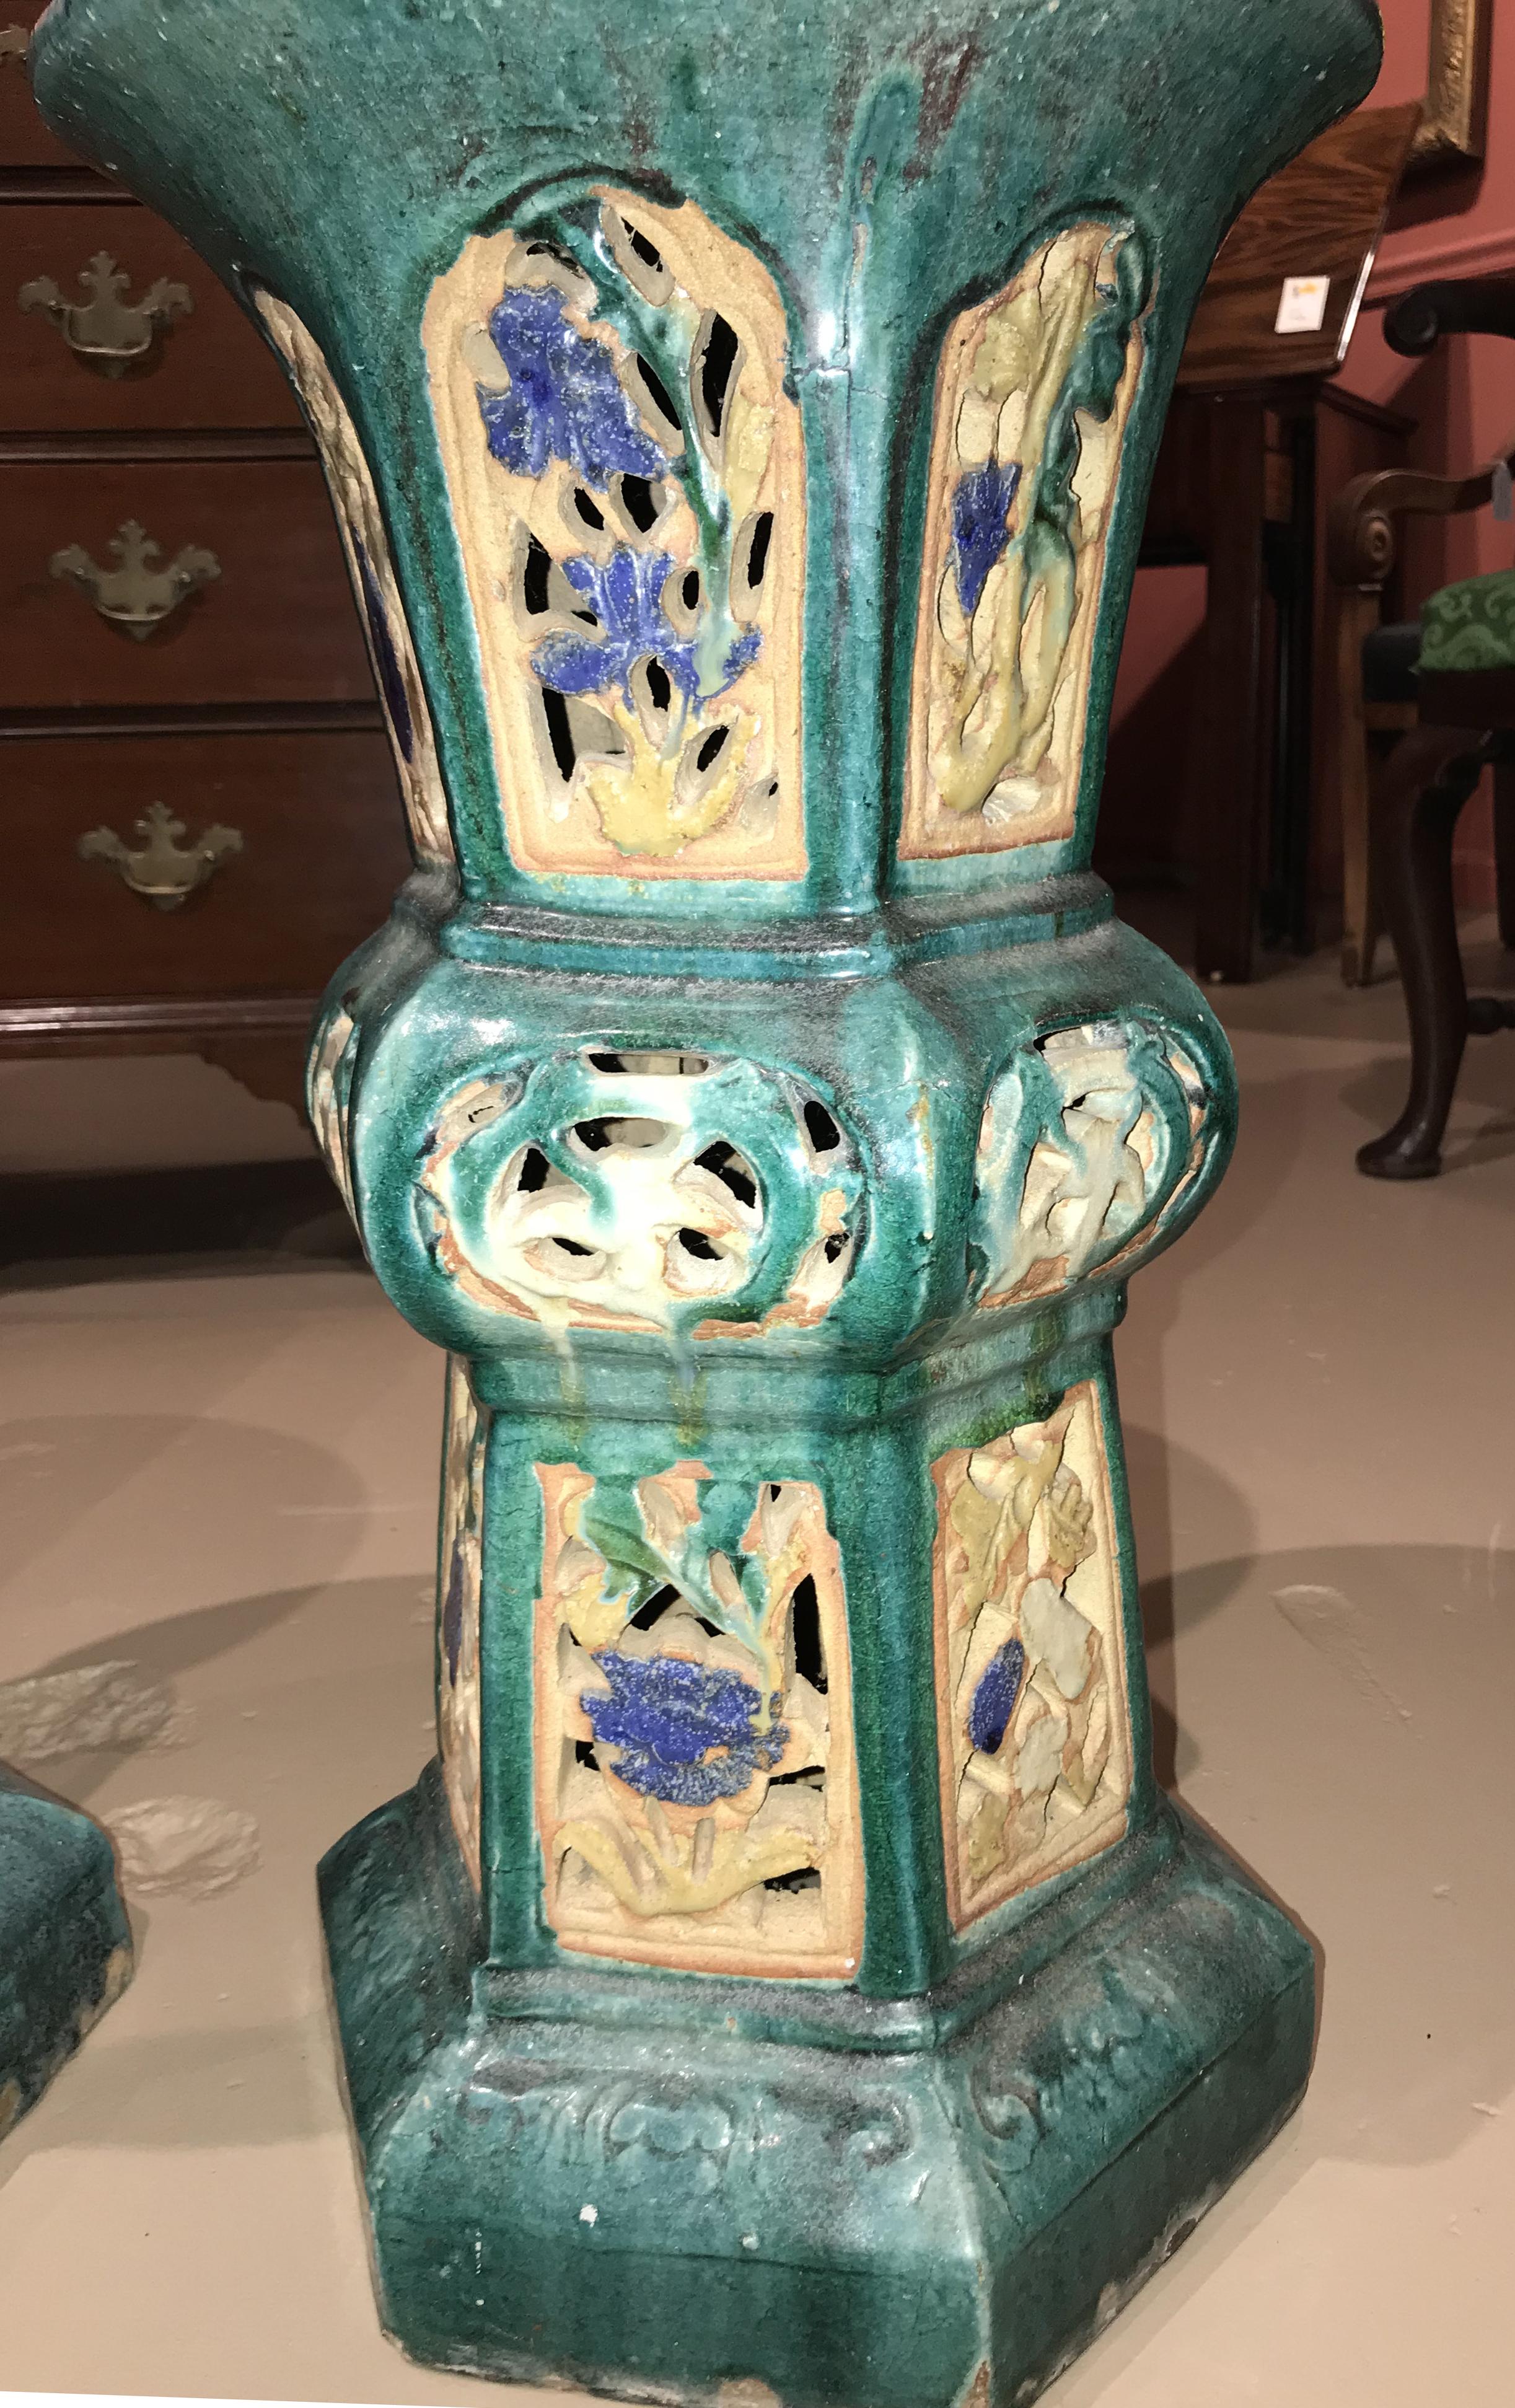 Chinese Export Pair of 19th Century Chinese Ceramic Reticulated Garden Pedestals or Stands